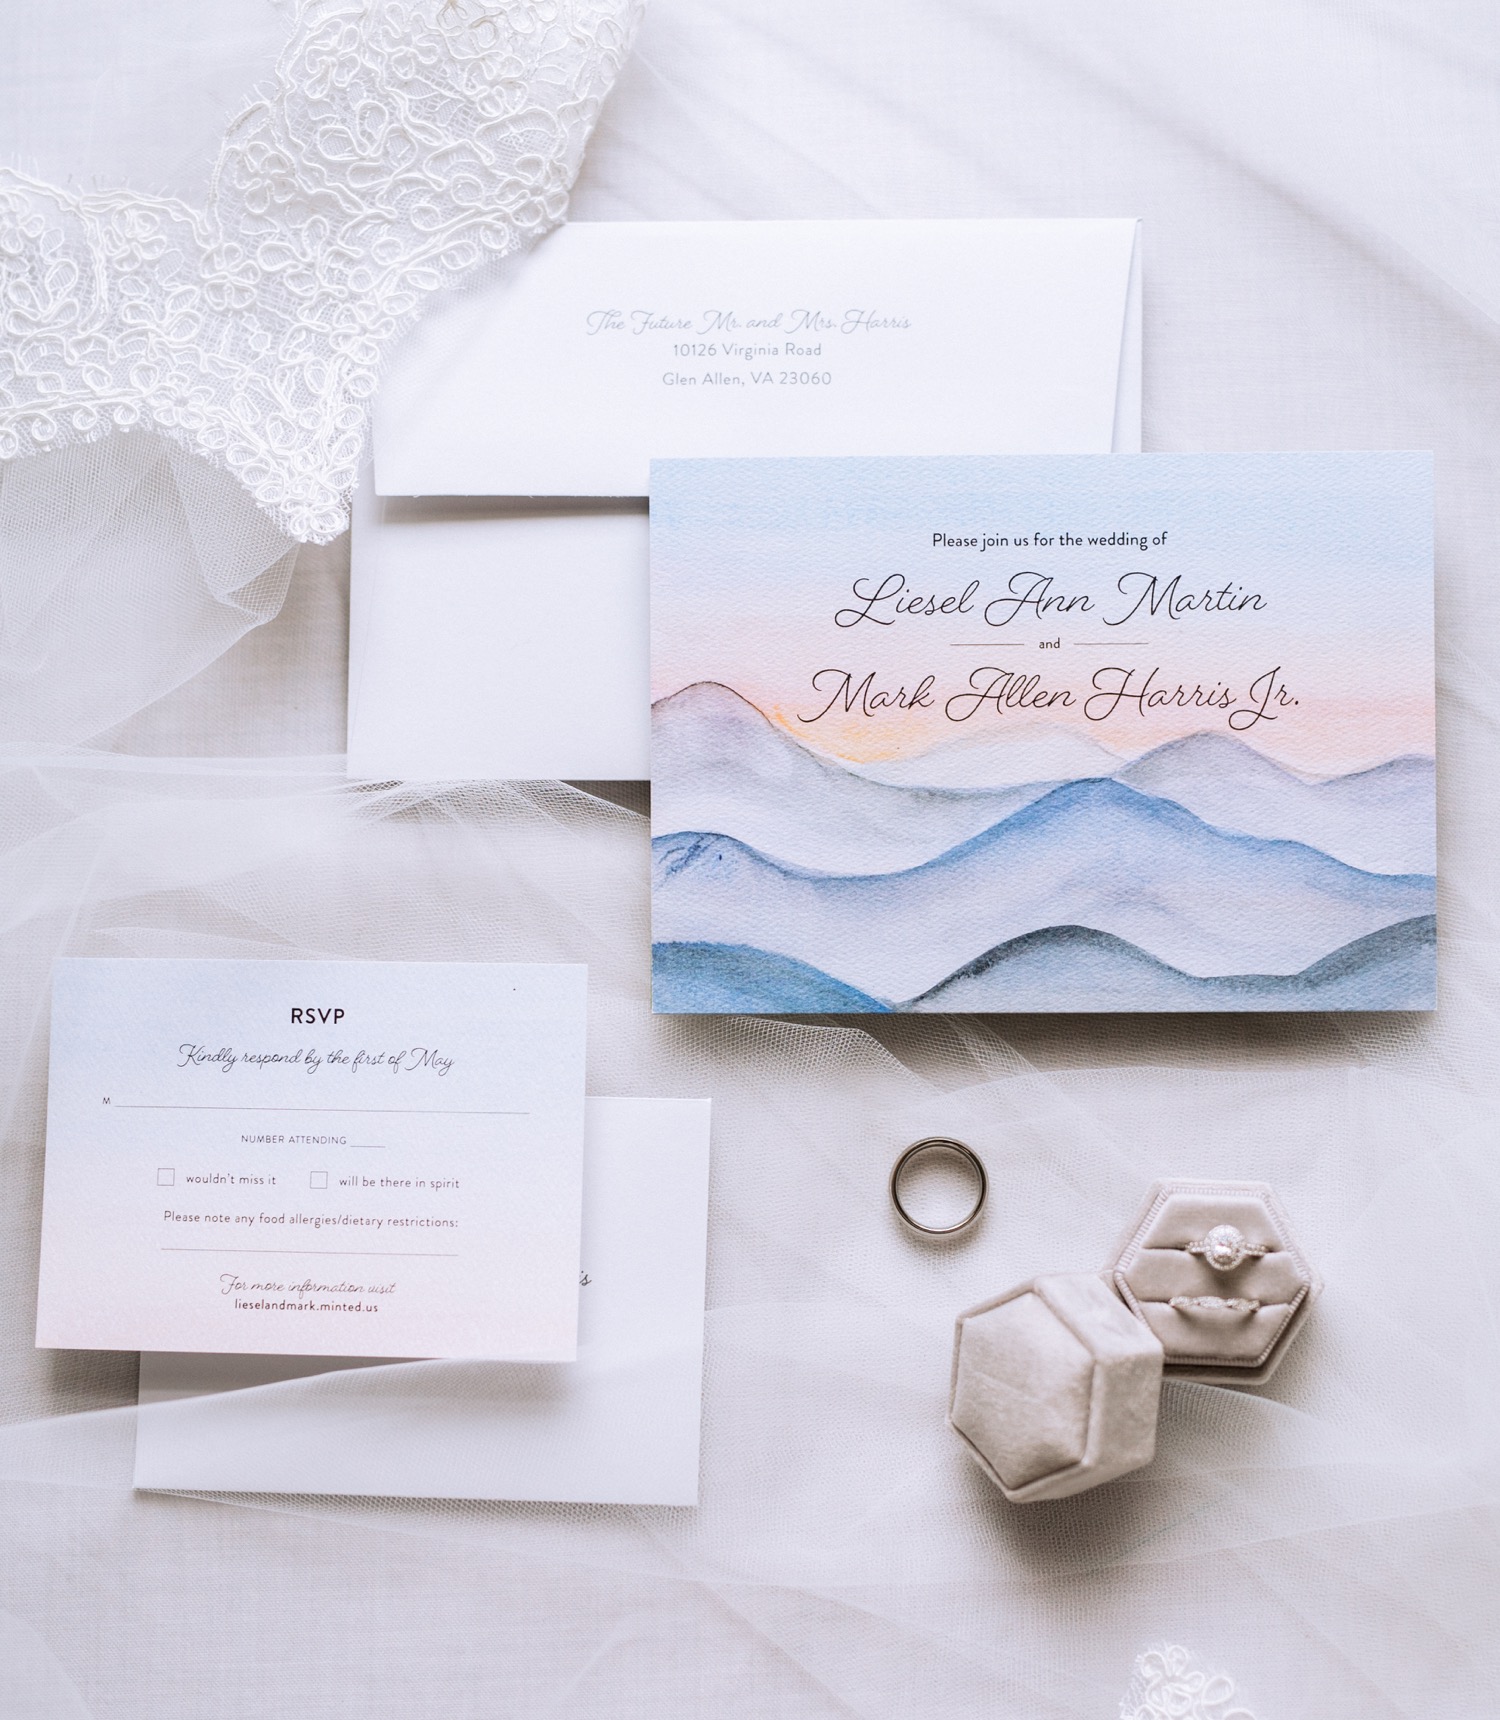 Wedding rings, invitation, and program are laid out before Charlottesville, VA wedding.